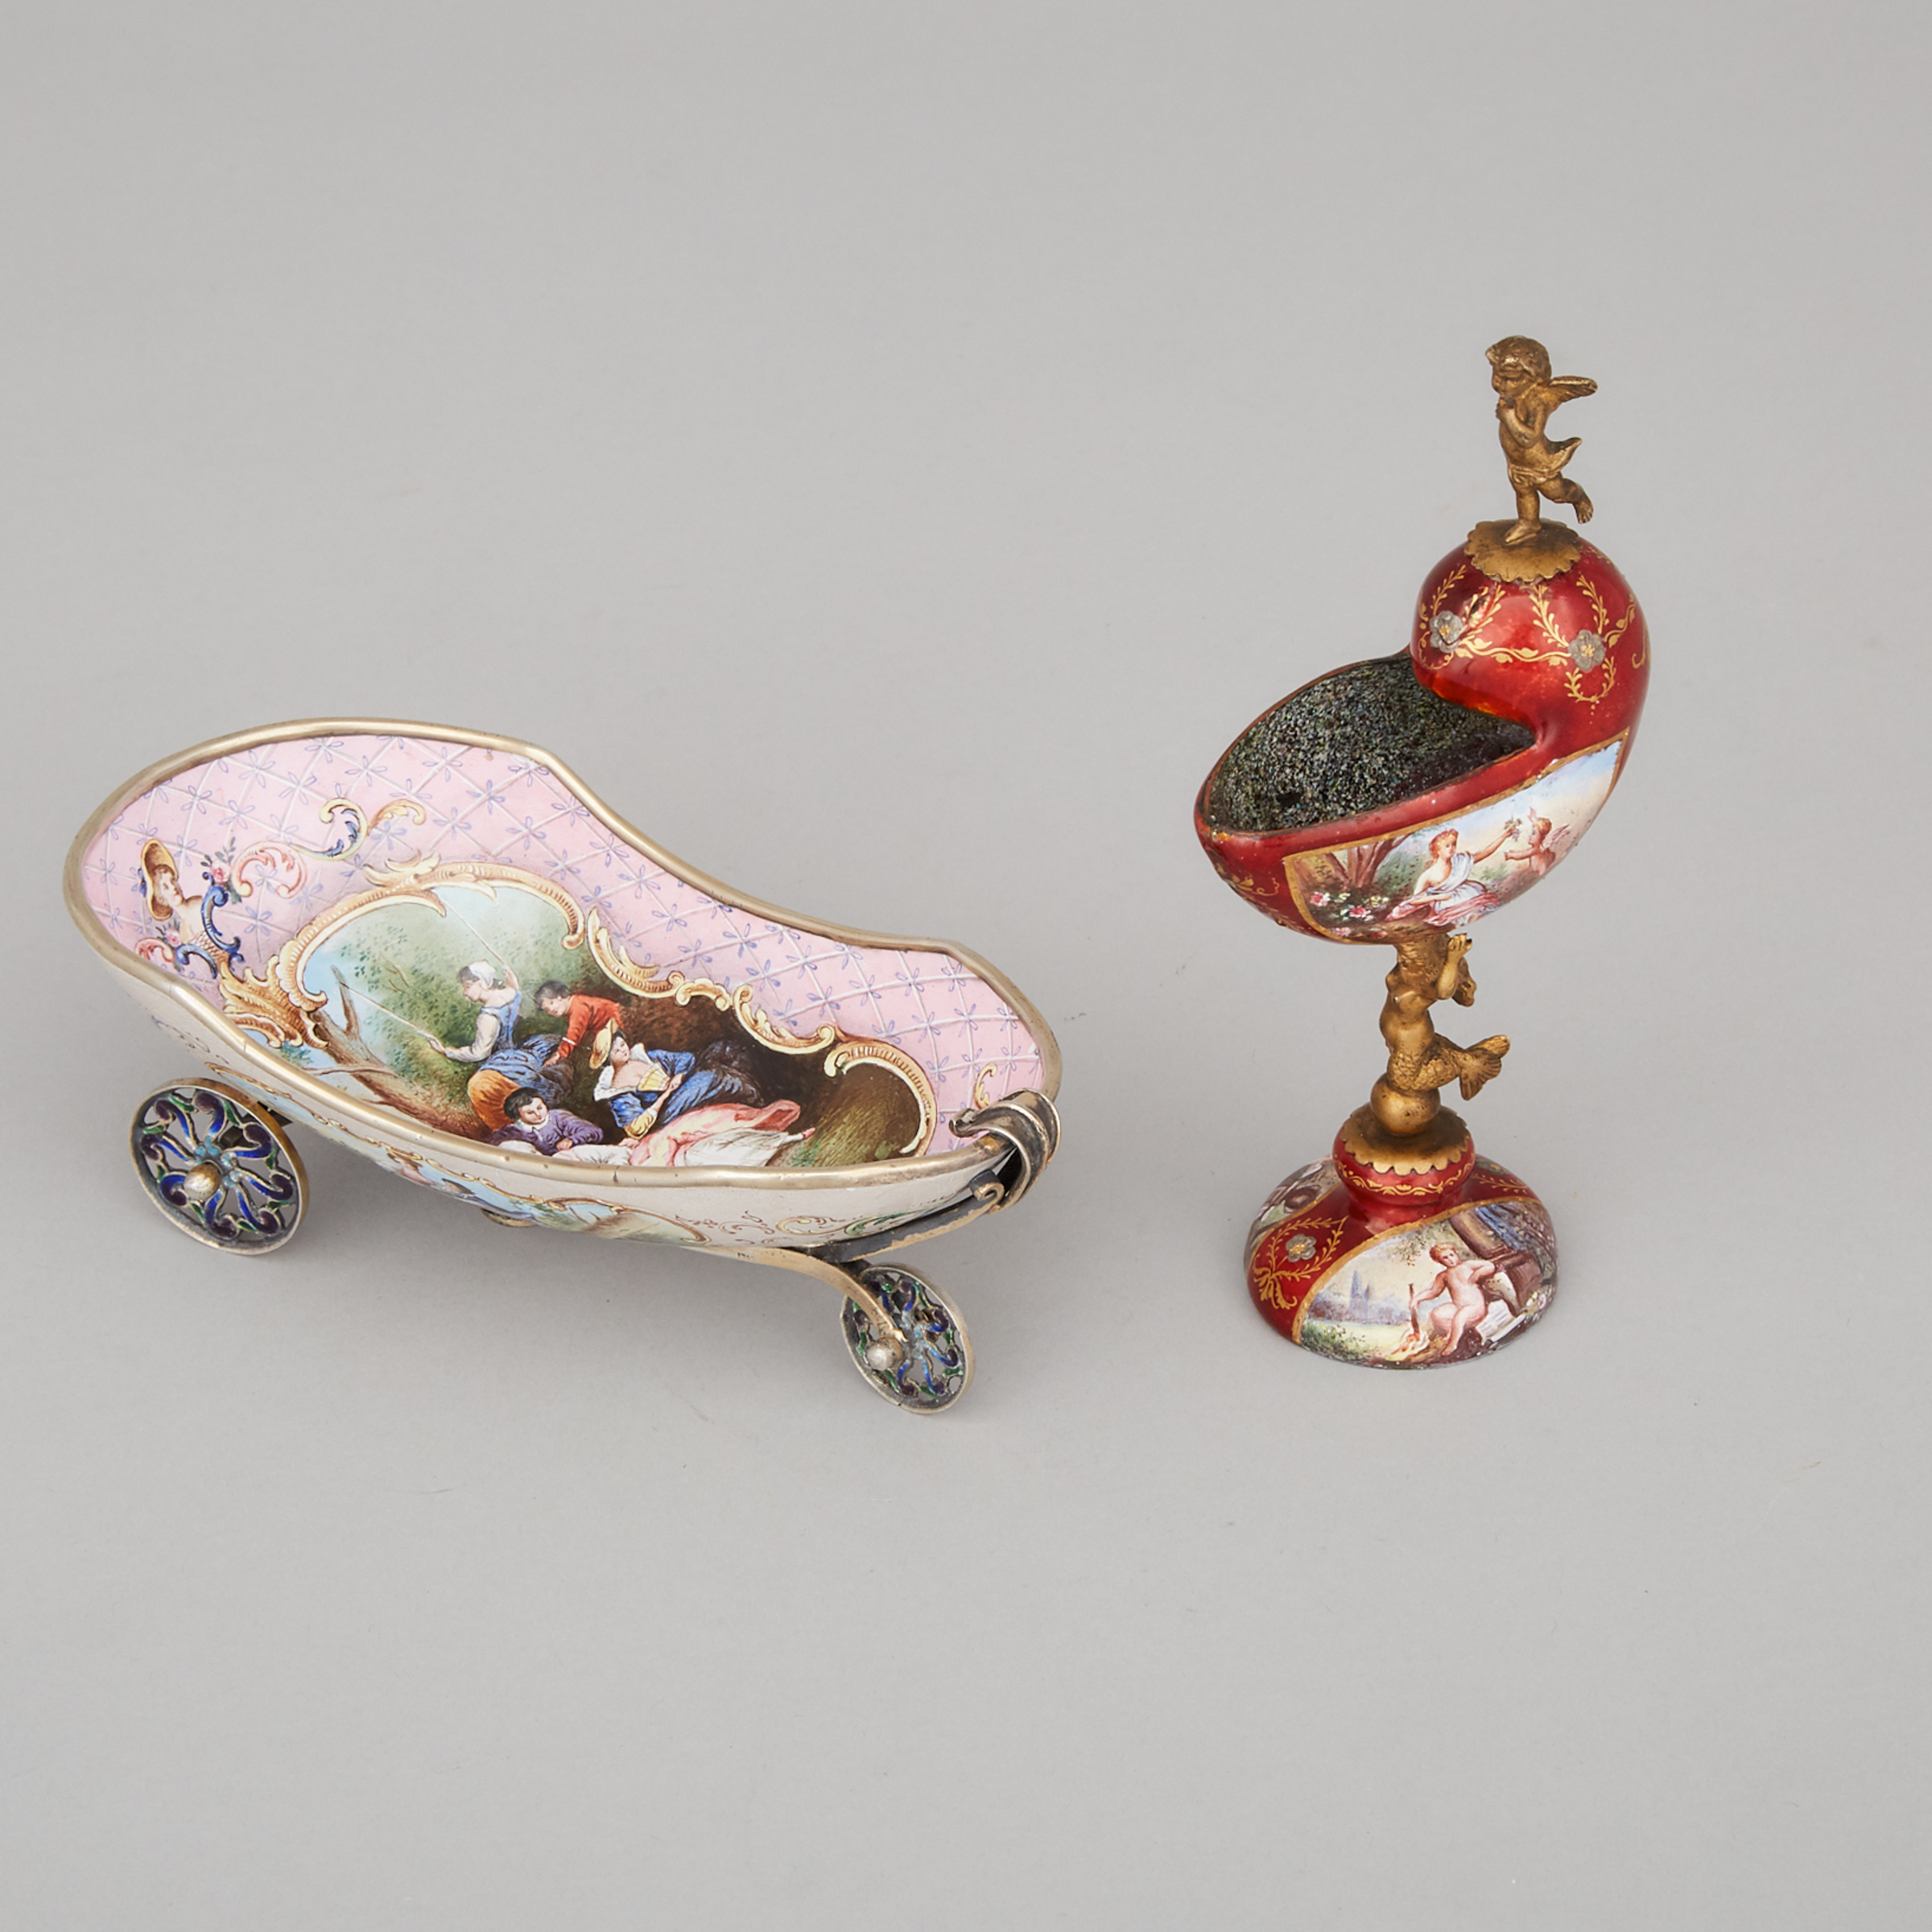 Two Pieces Viennese Enamel Ware, c.1900